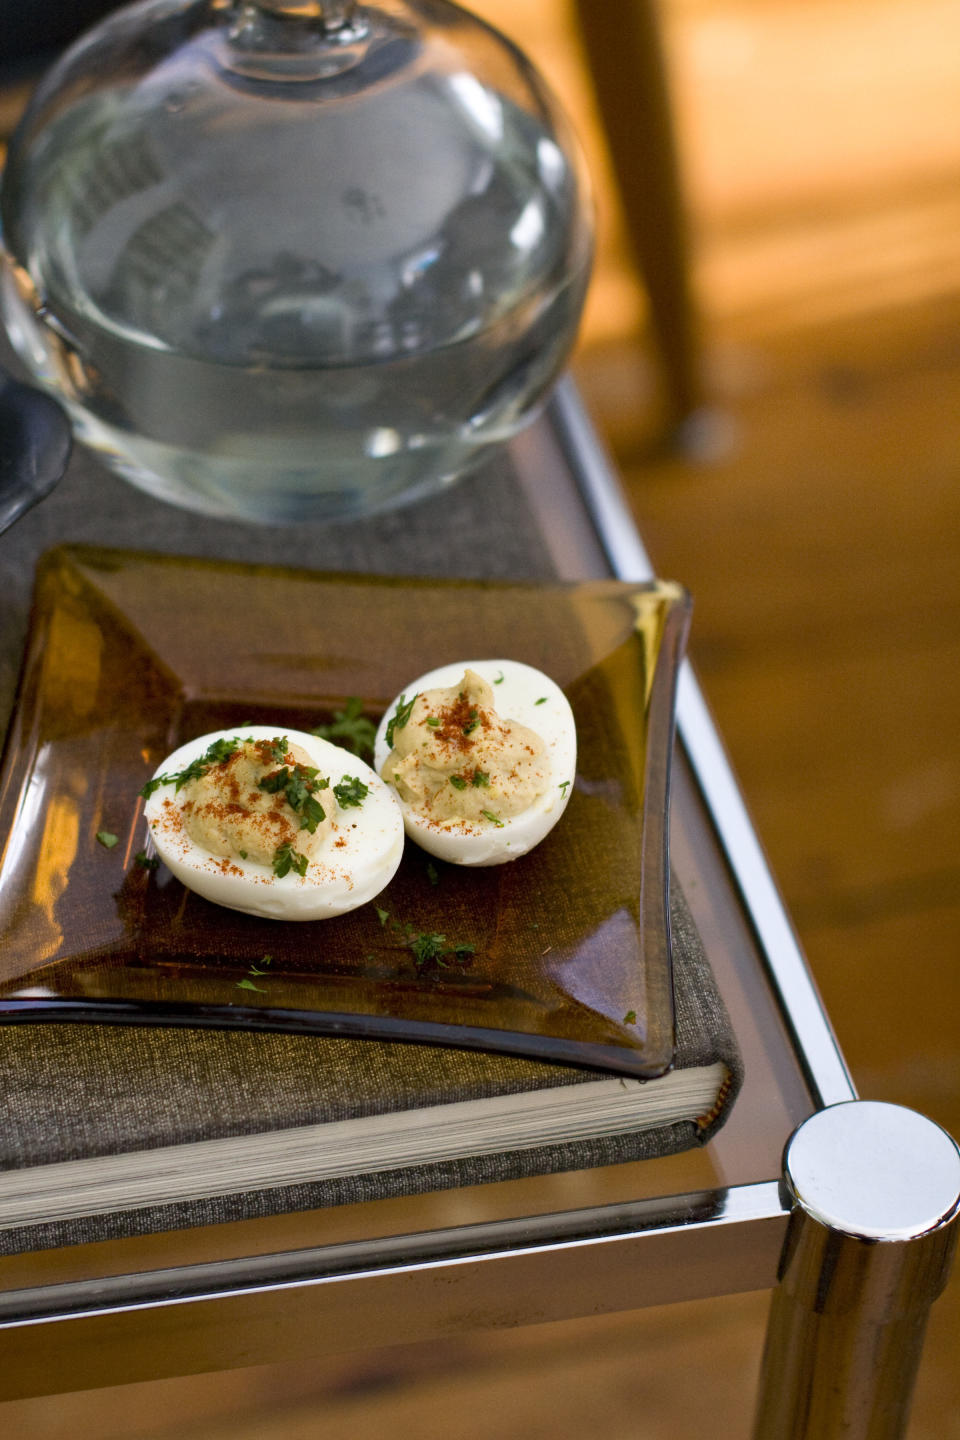 In this Feb. 13, 2012 photo taken in Concord, N.H., a recipe for deviled eggs is shown. (AP Photo/Matthew Mead)